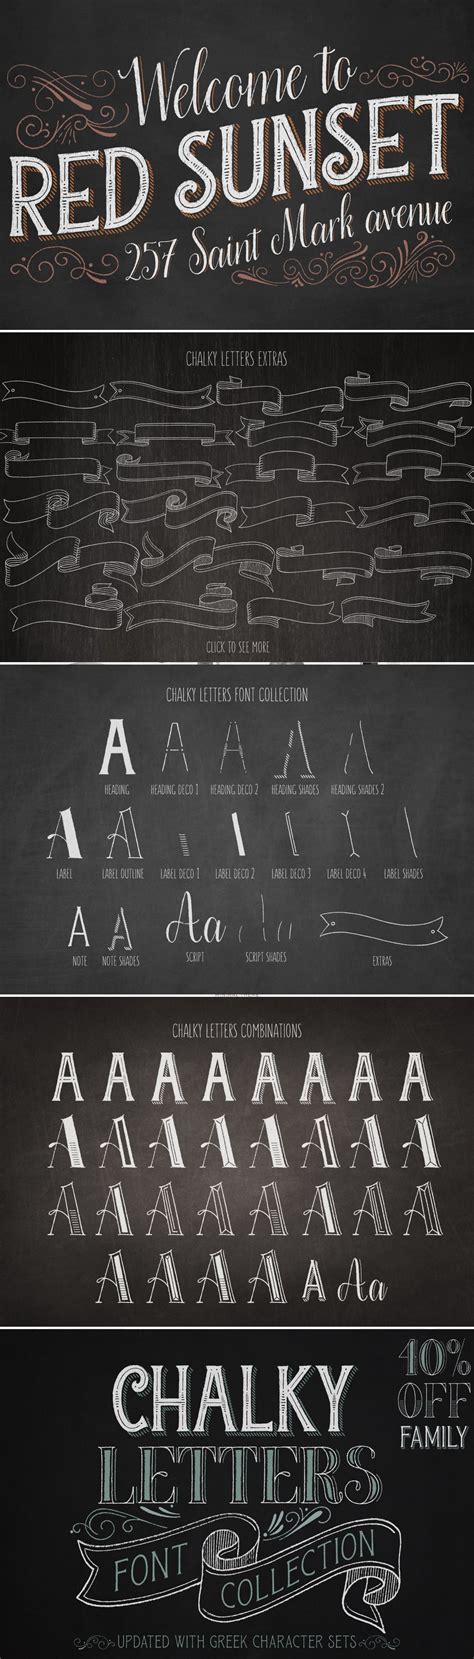 Chalky Letters Font Collection Lettering Fonts Chalk Lettering